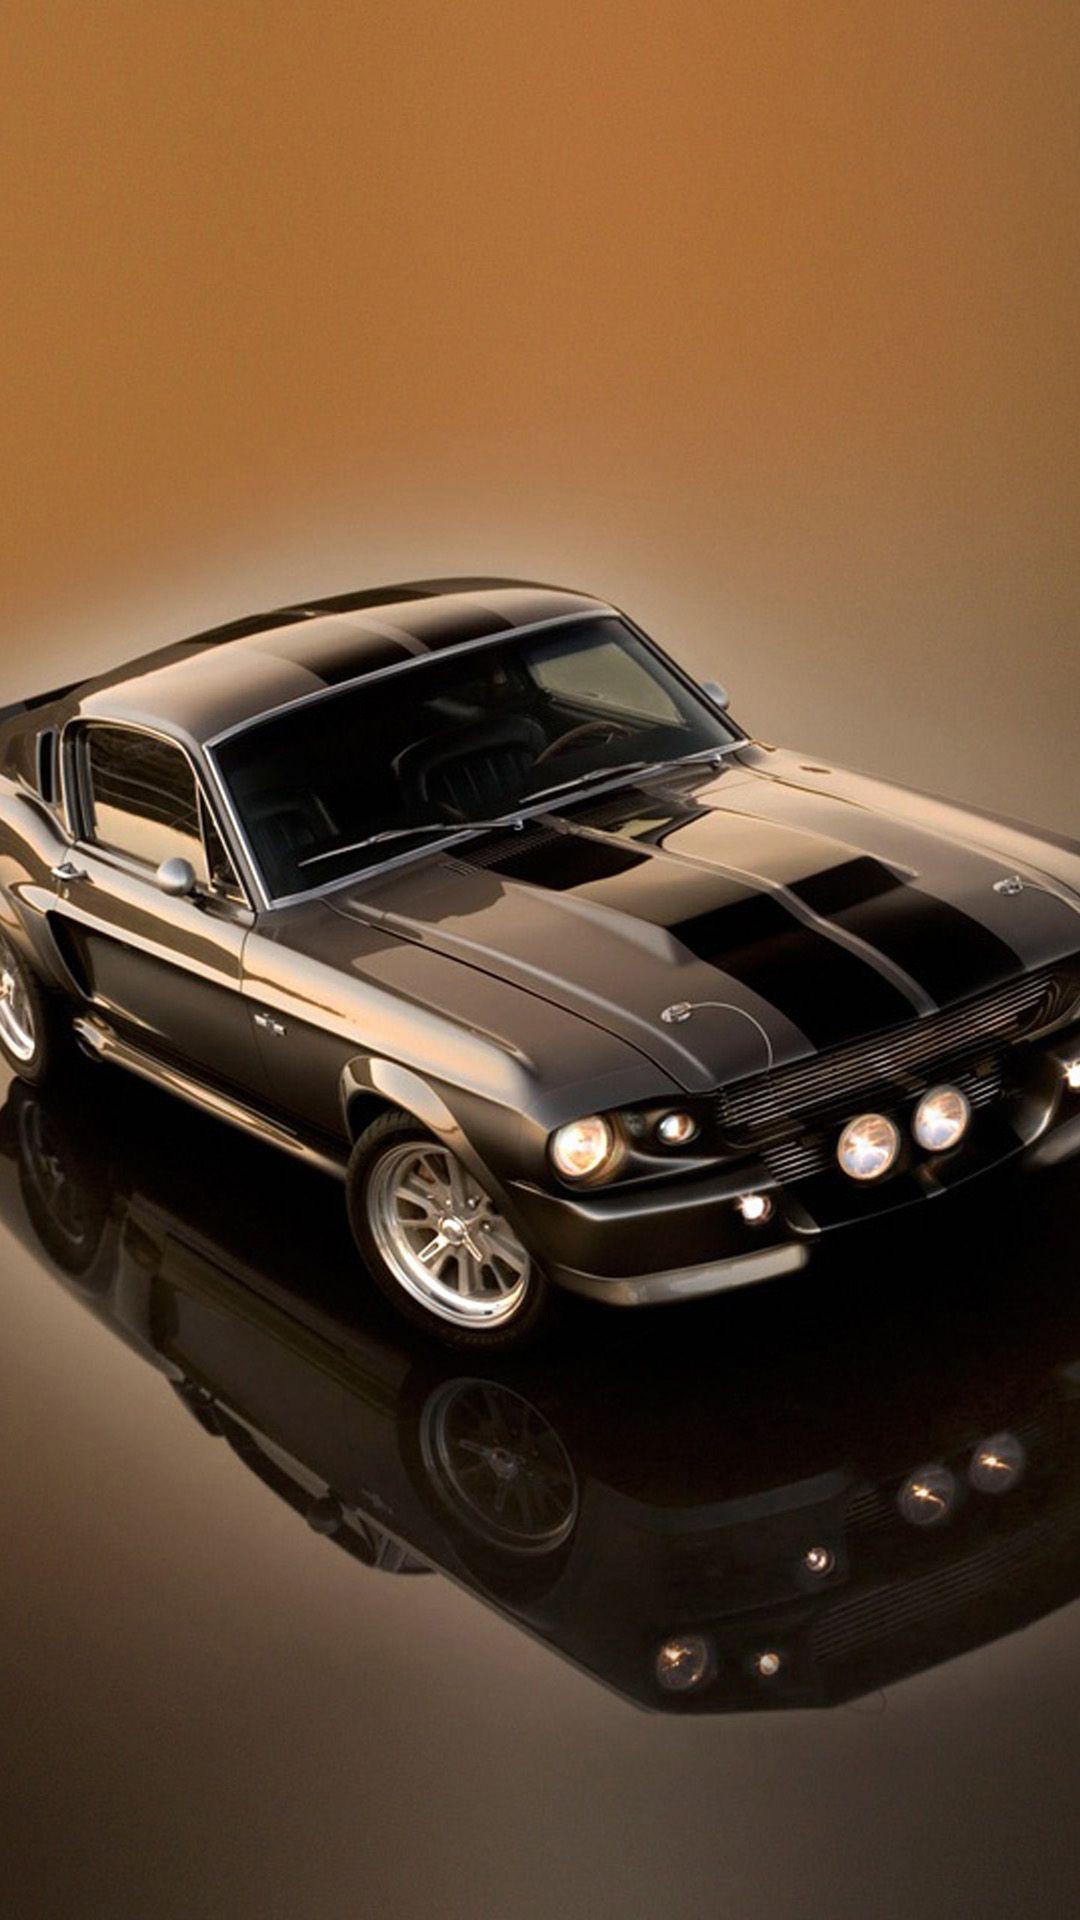 Wallpaper.wiki Ford Mustang Shelby GT500 Eleanor HD Wallpaper IPhone